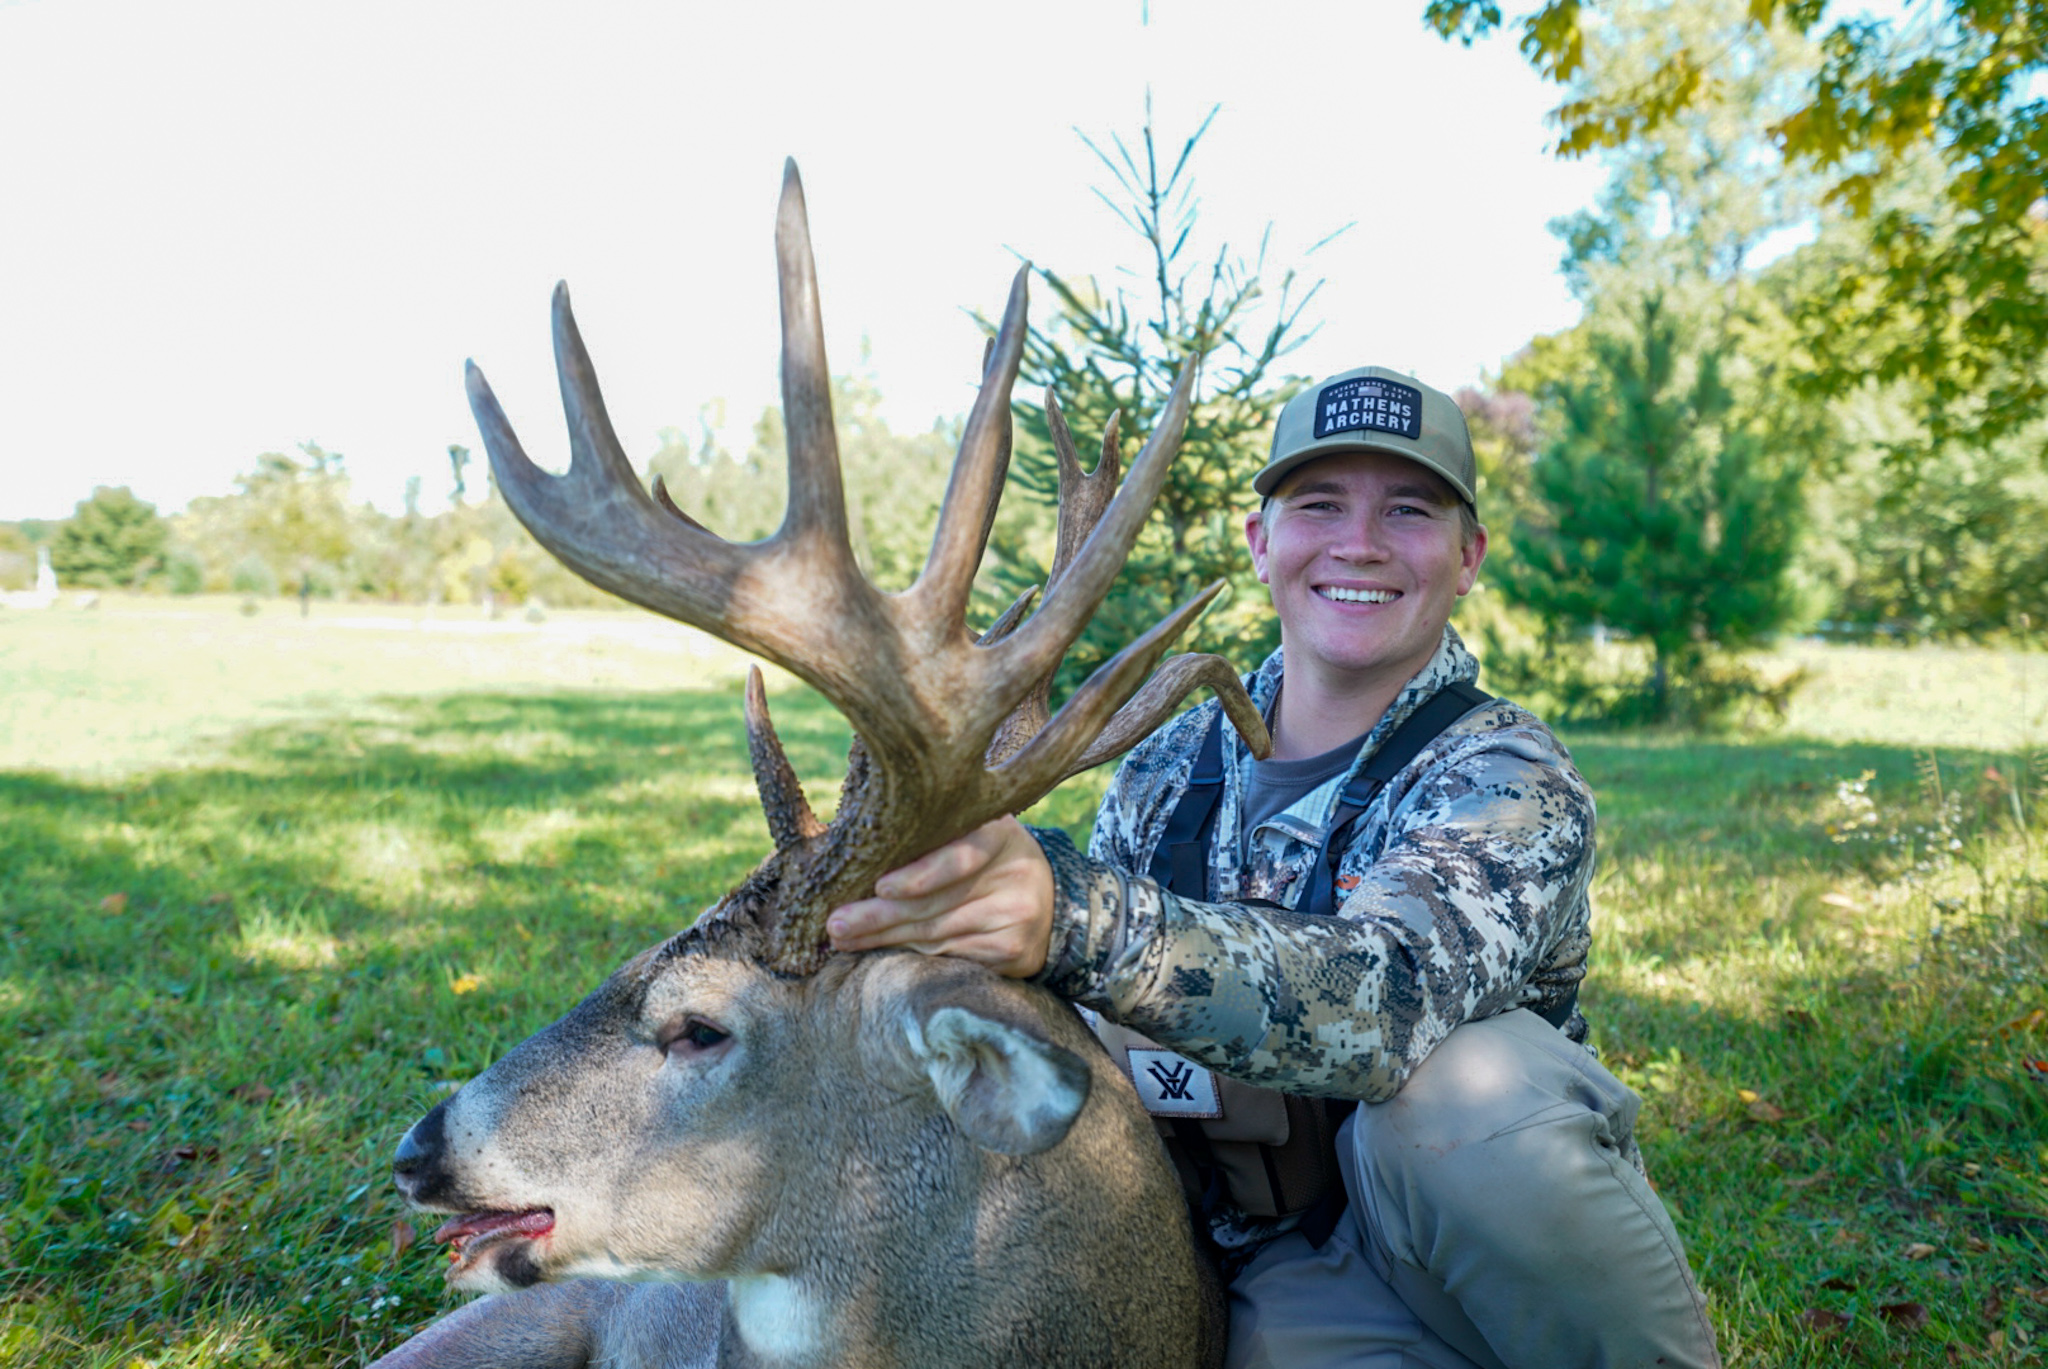 A grinning young hunter in a camo shirt holds the head of a whitetail buck, whose antlers are in profile.